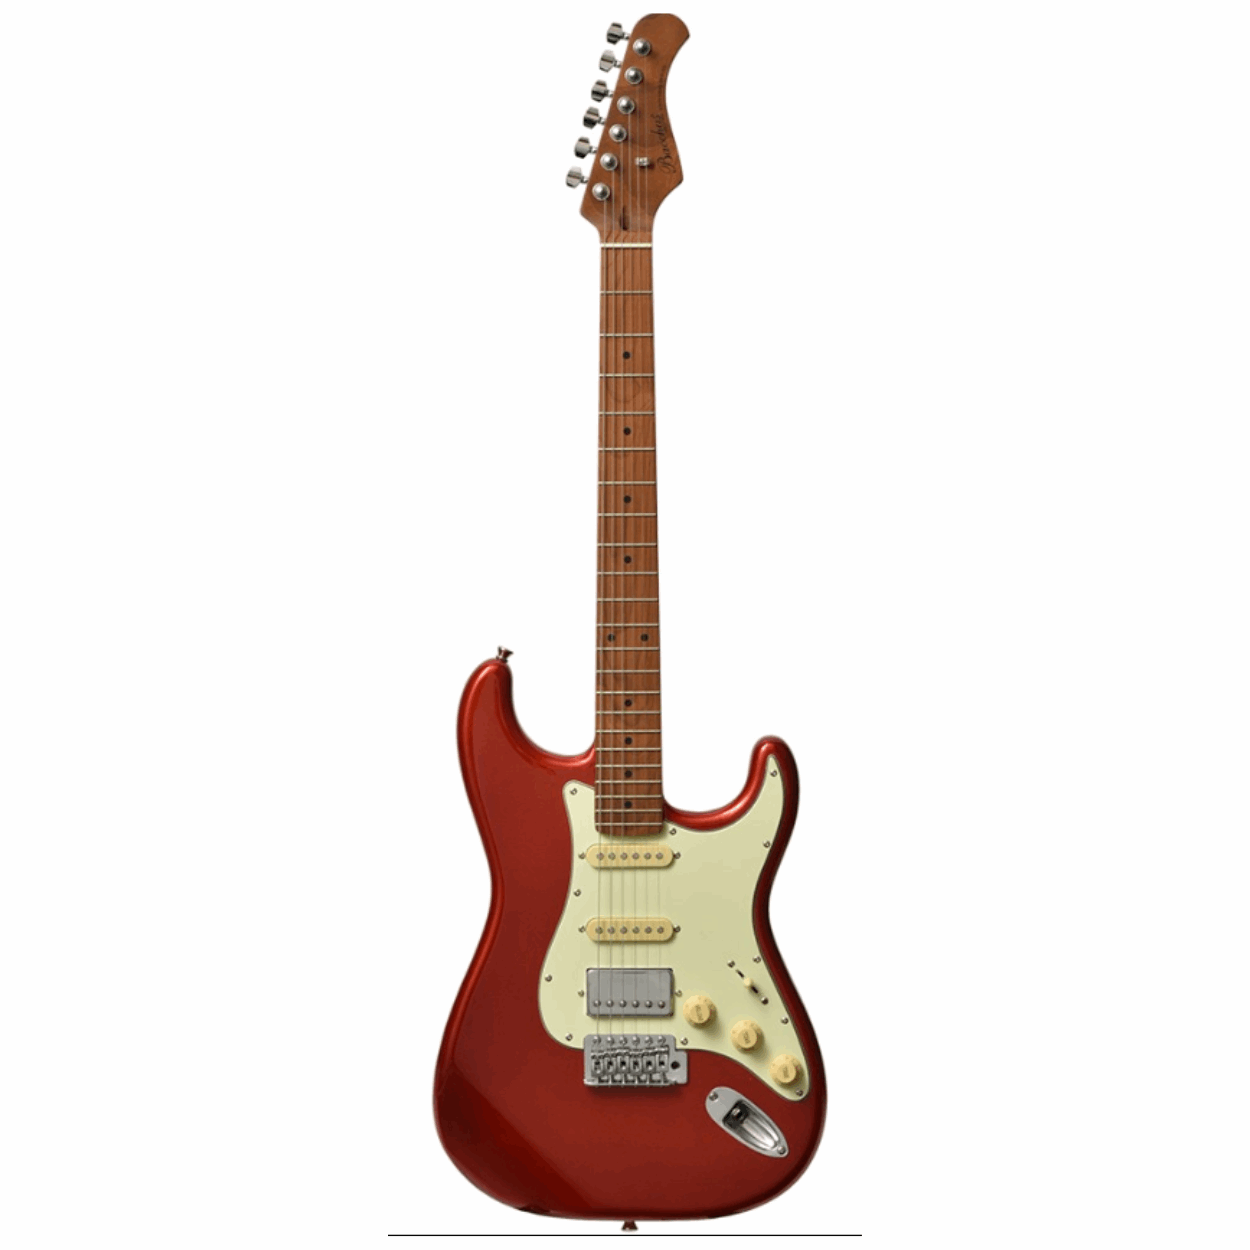 Bacchus Bst-2-rsm/m-car Universe Series Roasted Maple Electric Guitar, Candy Apple Red With Bag